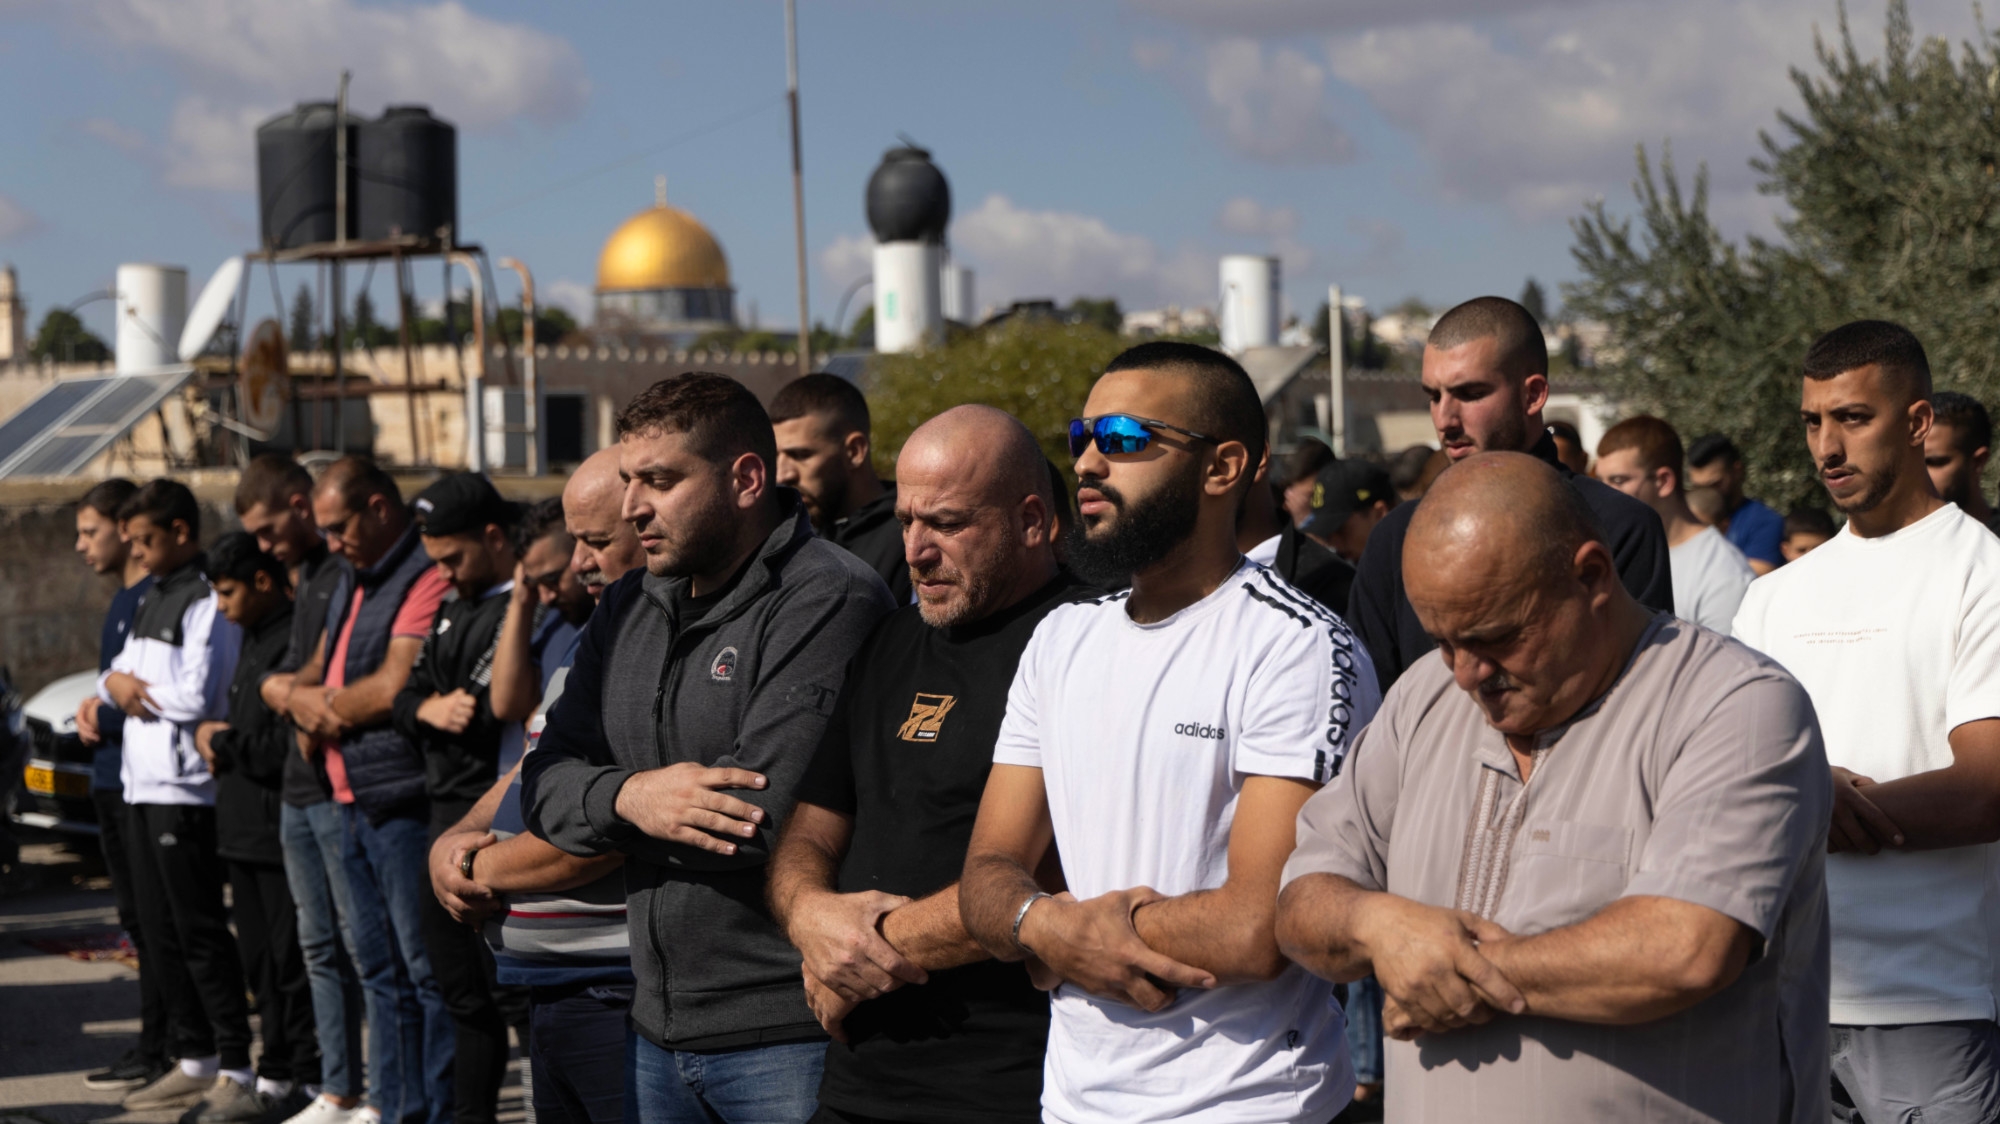 Palestinians forced to pray outside Al Aqsa Mosque in occupied East Jerusalem on 17 November amid Israeli restriction (MEE/Faiz Abu Rmeleh).